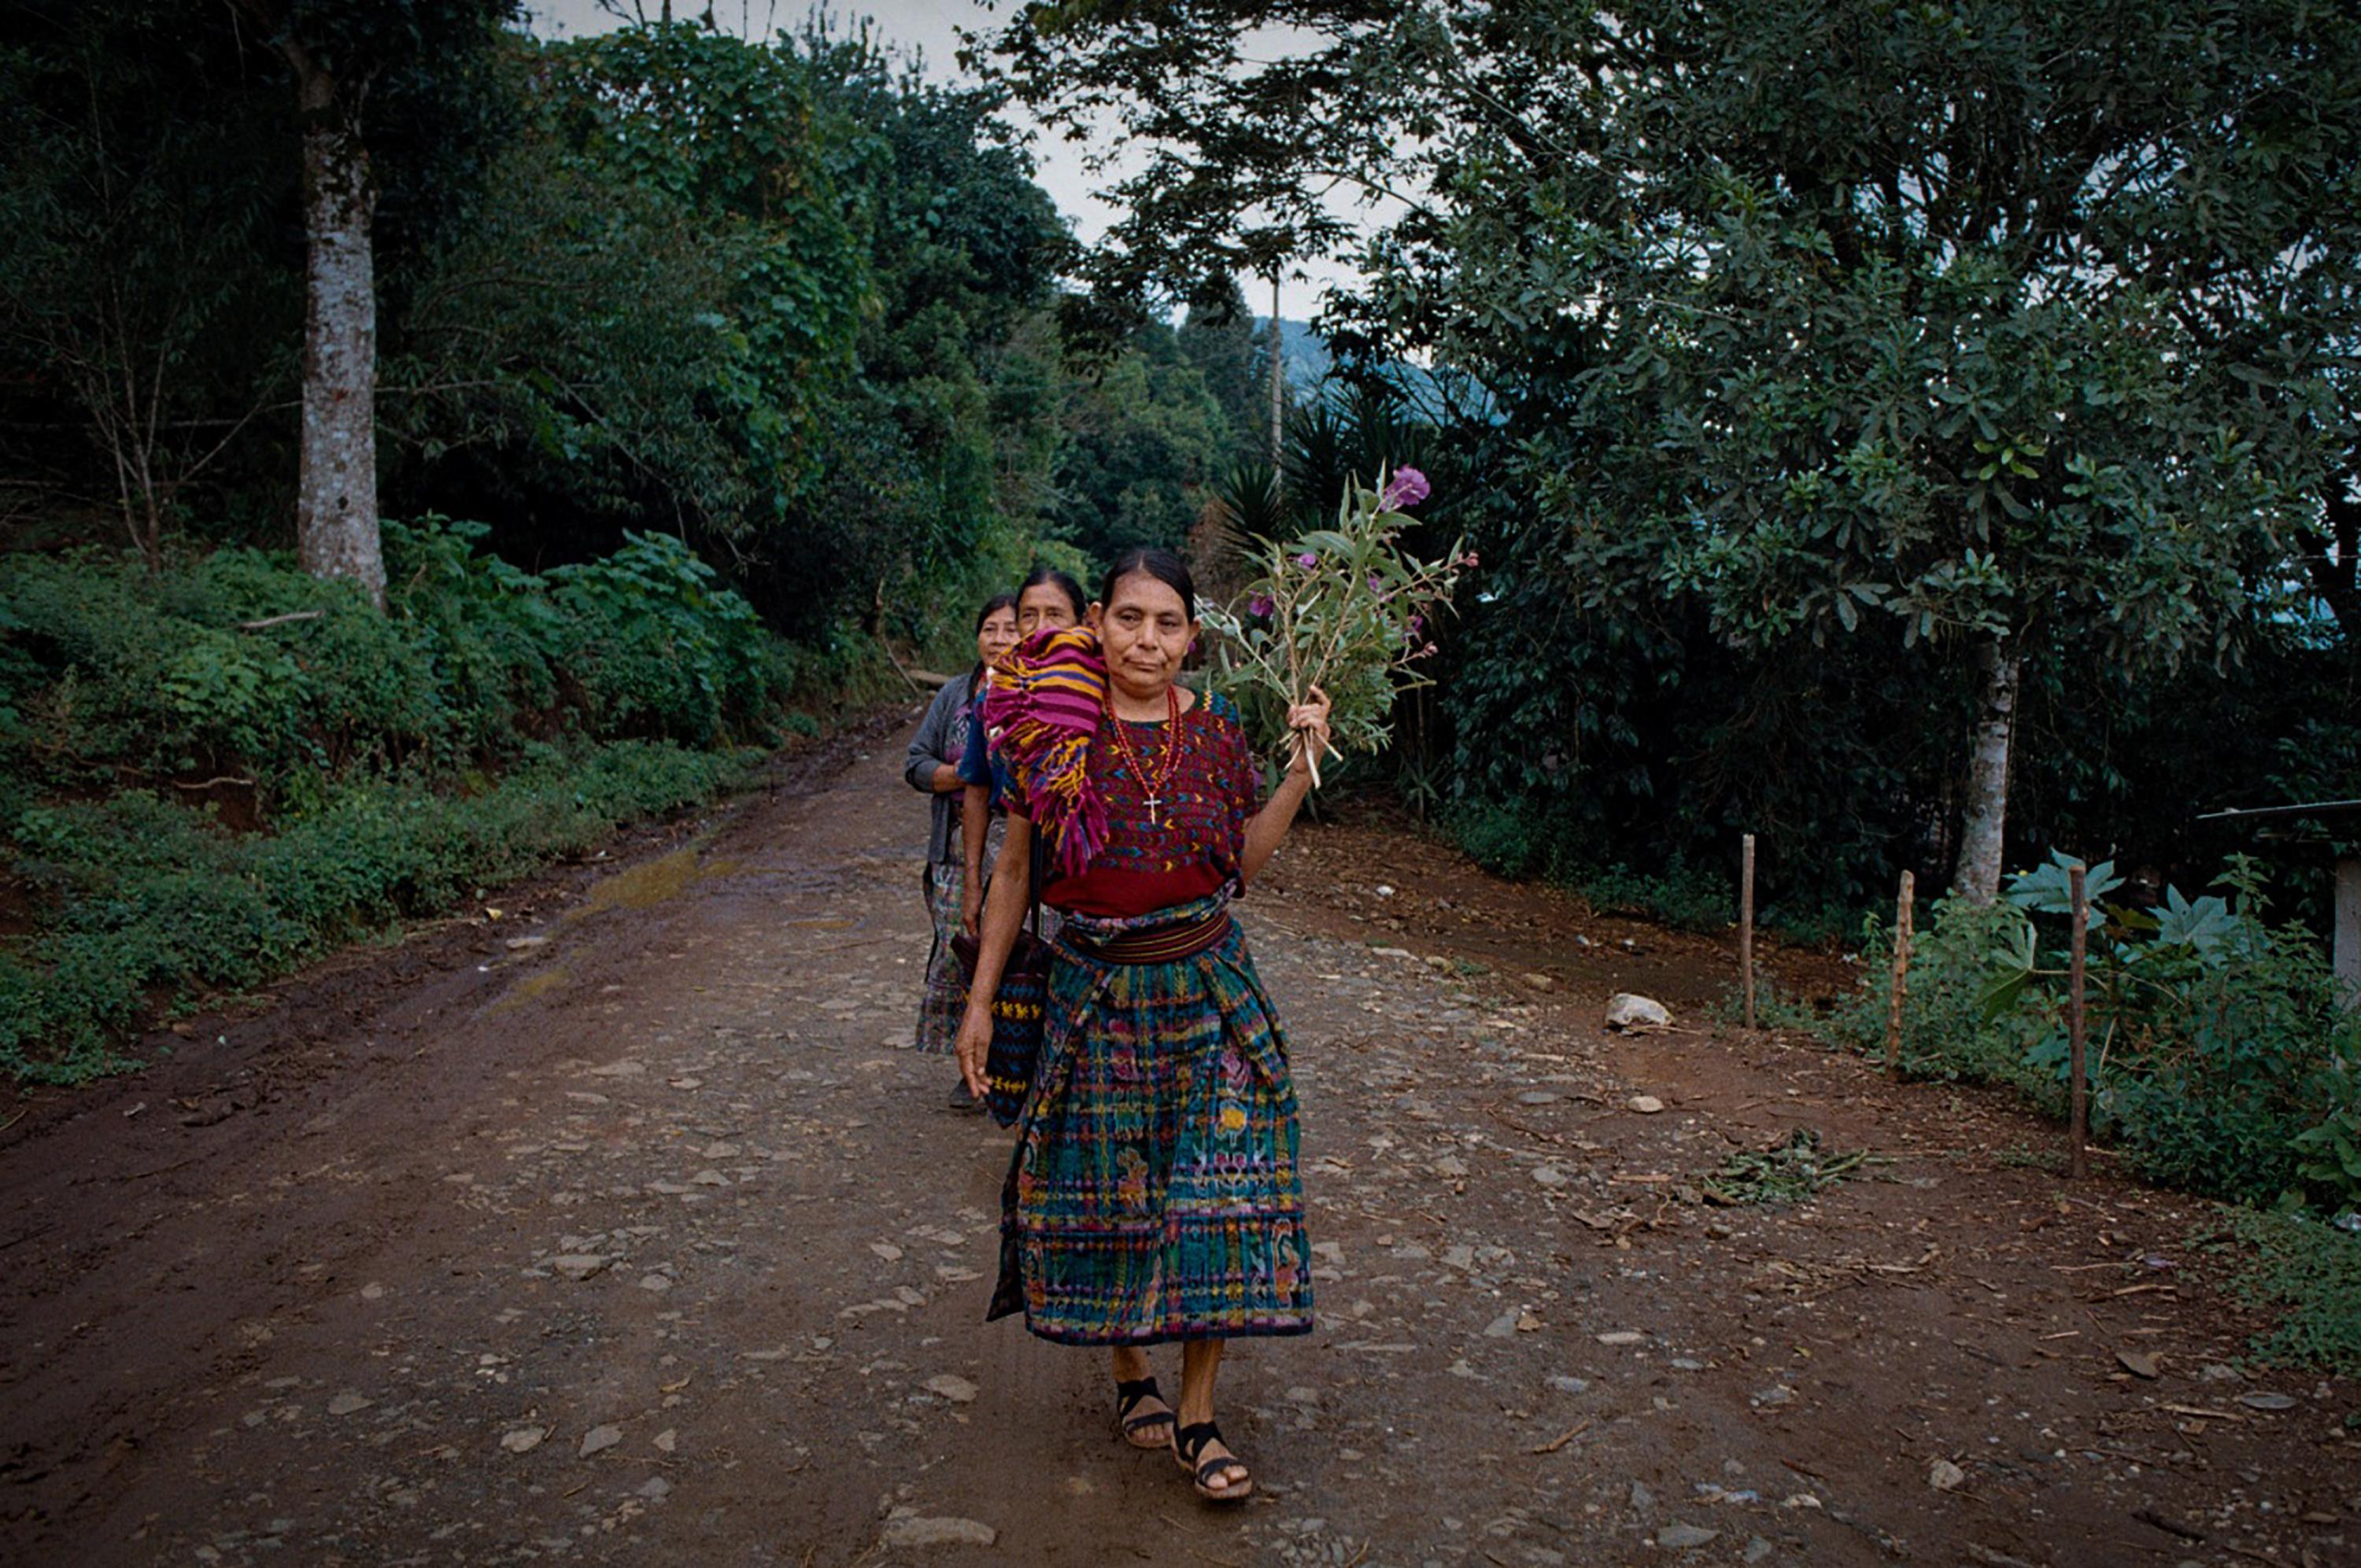 Paulina Ixpatá, survivor of the Rancho Bejuco massacre, in Rabinal, Baja Verapaz. Ixpatá is one of 36 Achí Mayan women who sought justice for the sexual violence they suffered during the Guatemalan civil war in Rabinal. Photo Sergio Ortiz Borbolla